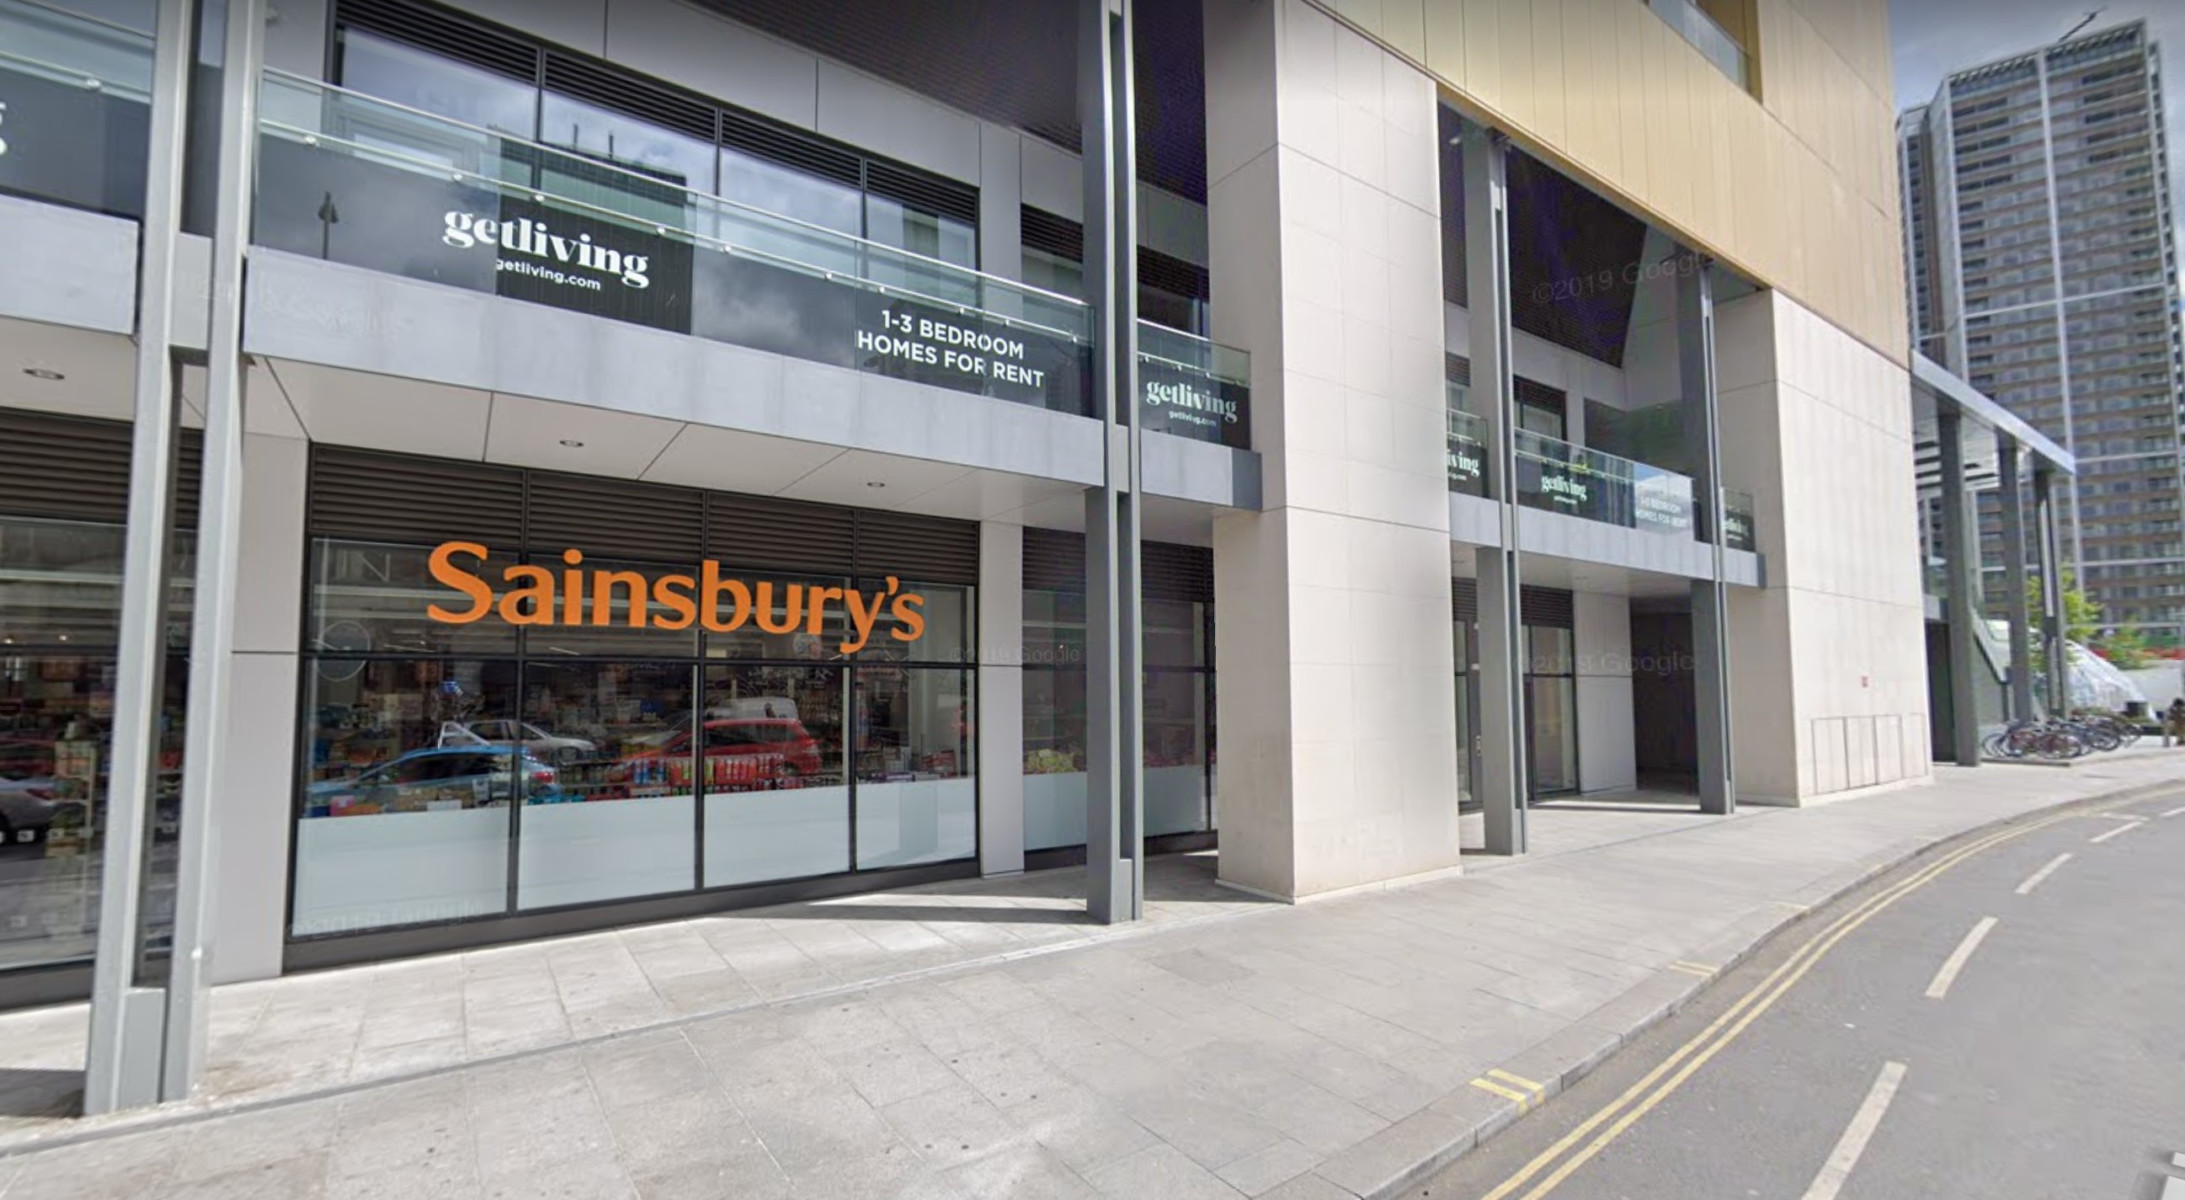 The Sainsbury's was targeted by looters on Wednesday night